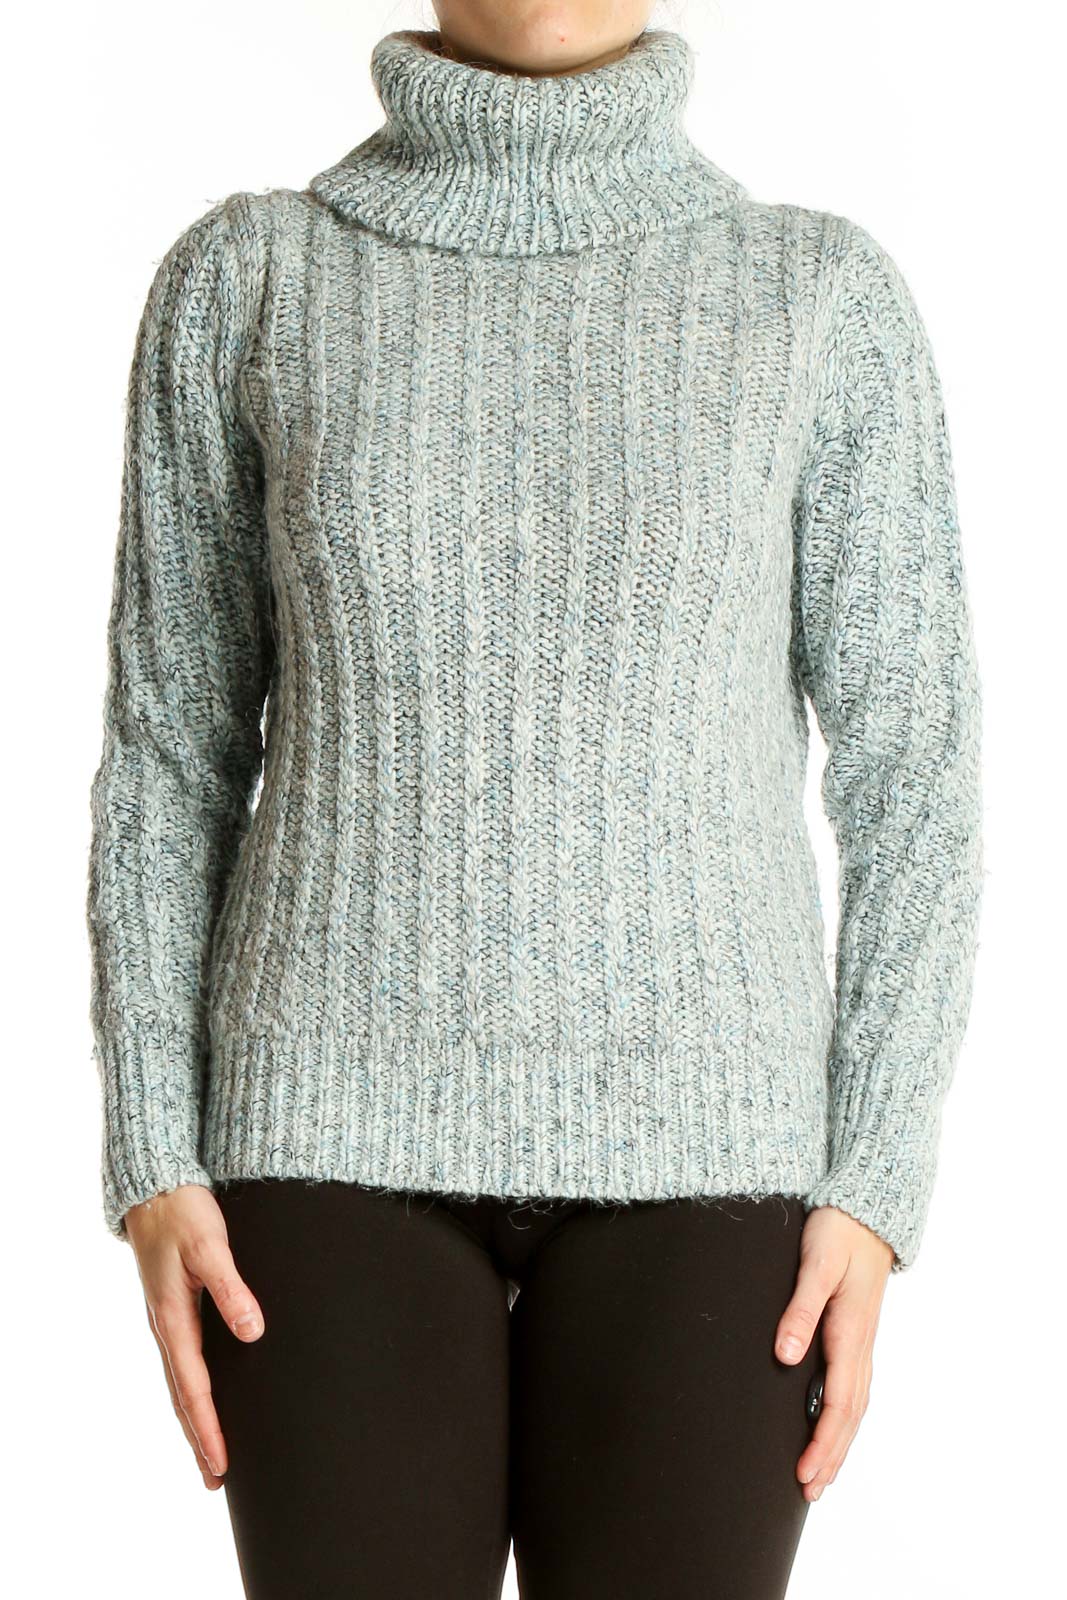 Gray Cable Knit Sweater Front